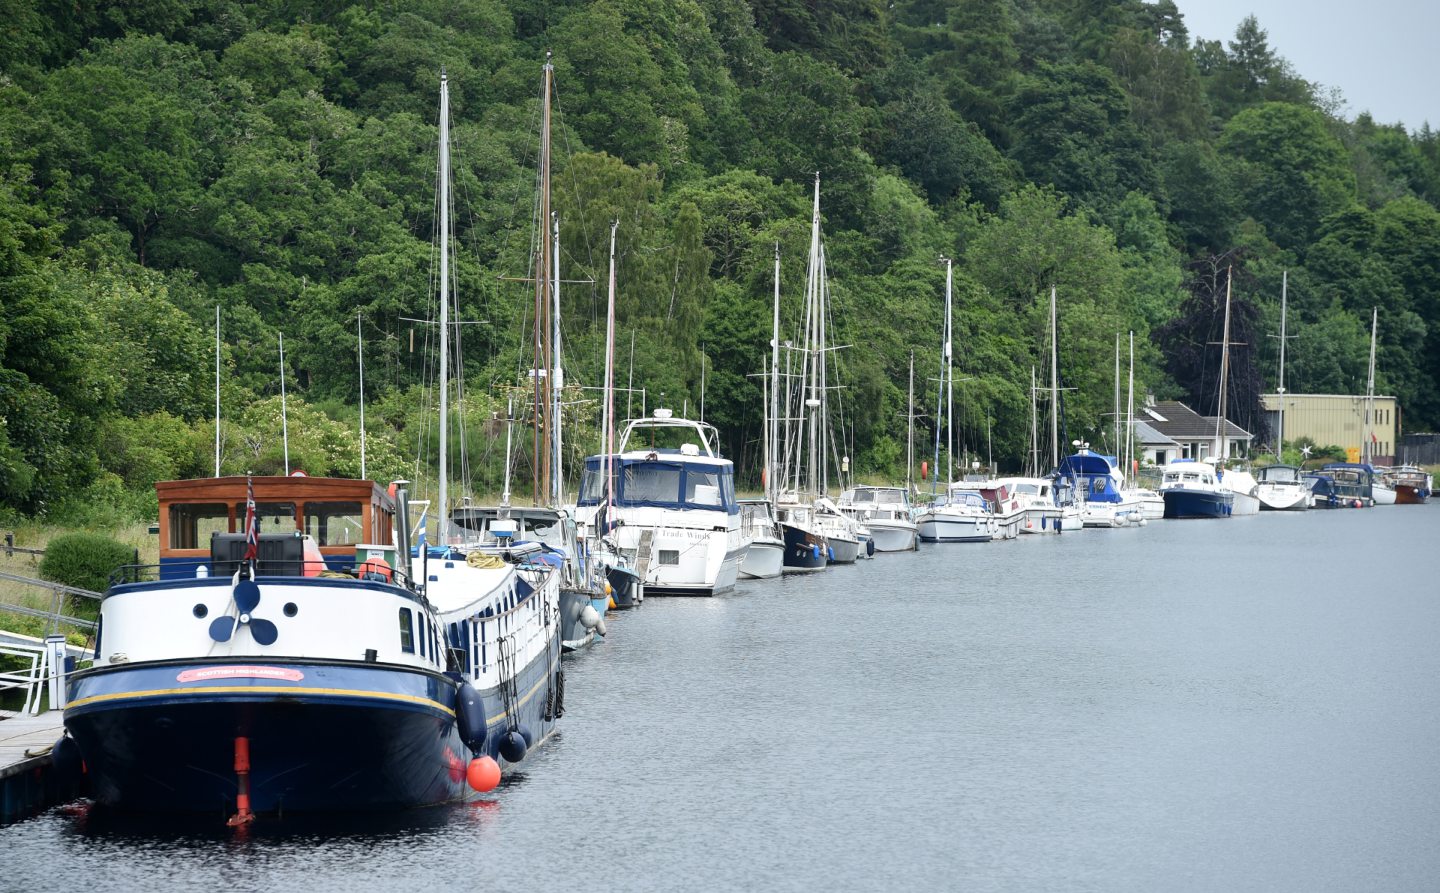 This route will take you along the Caledonian Canal - with plenty options for pit-stops, it's one of the best running routes for beginners in the highlands.